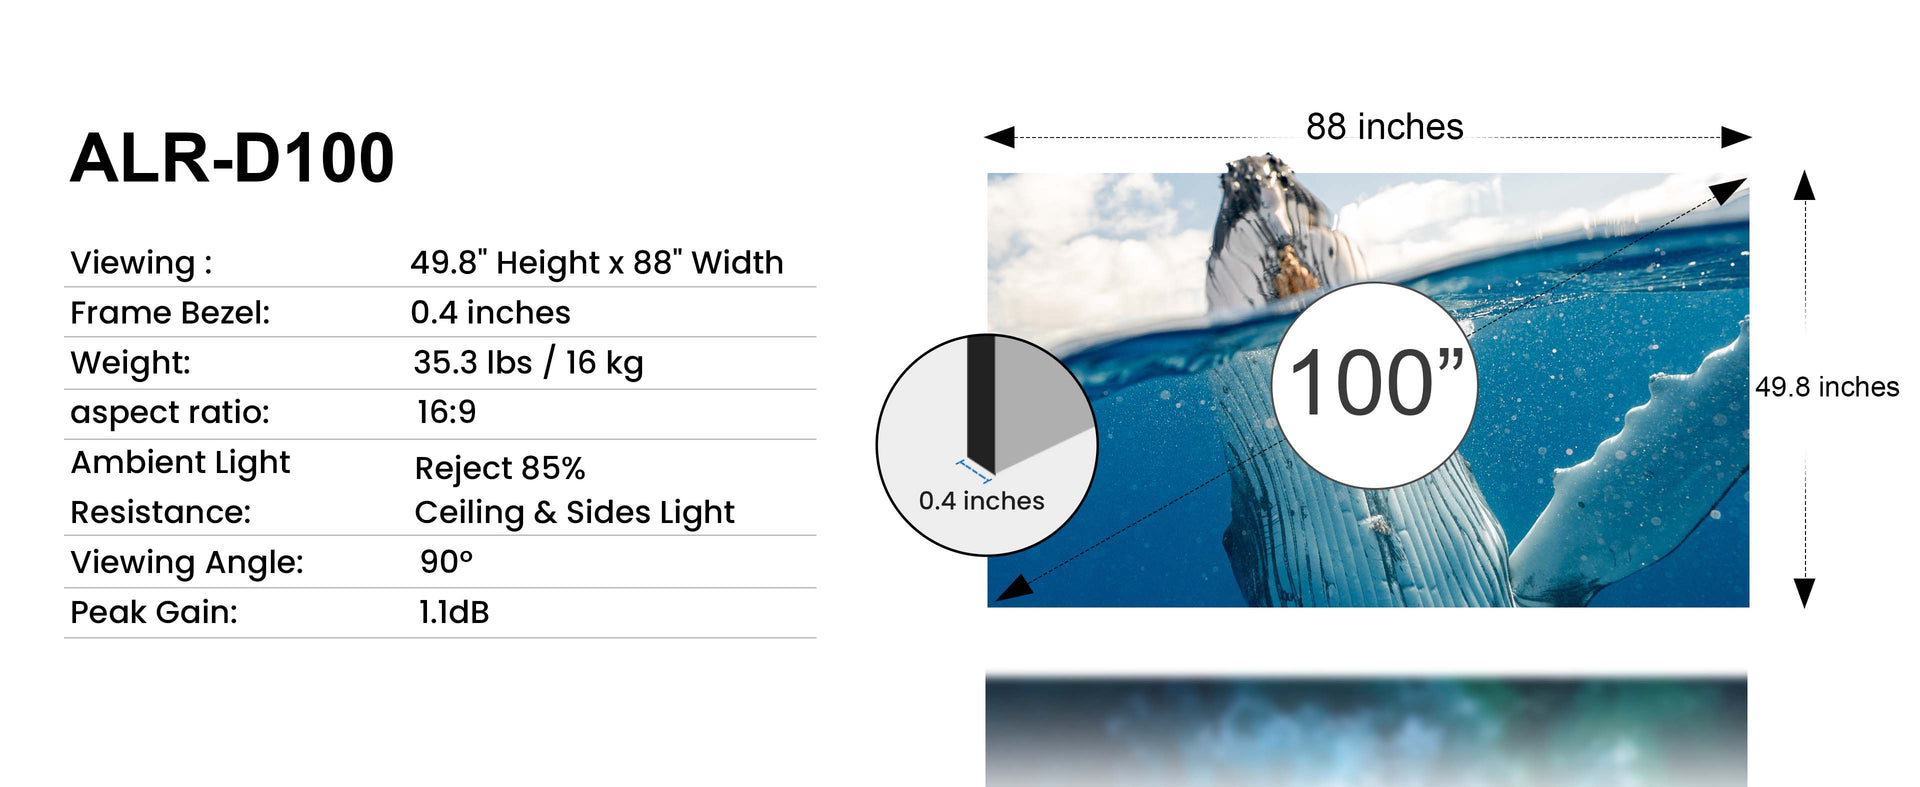 Specifications of the 100-inch AWOL VISION ALR-D100 Daylight ALR Screen, including 1.1 dB peak gain and 85% ambient light rejection.